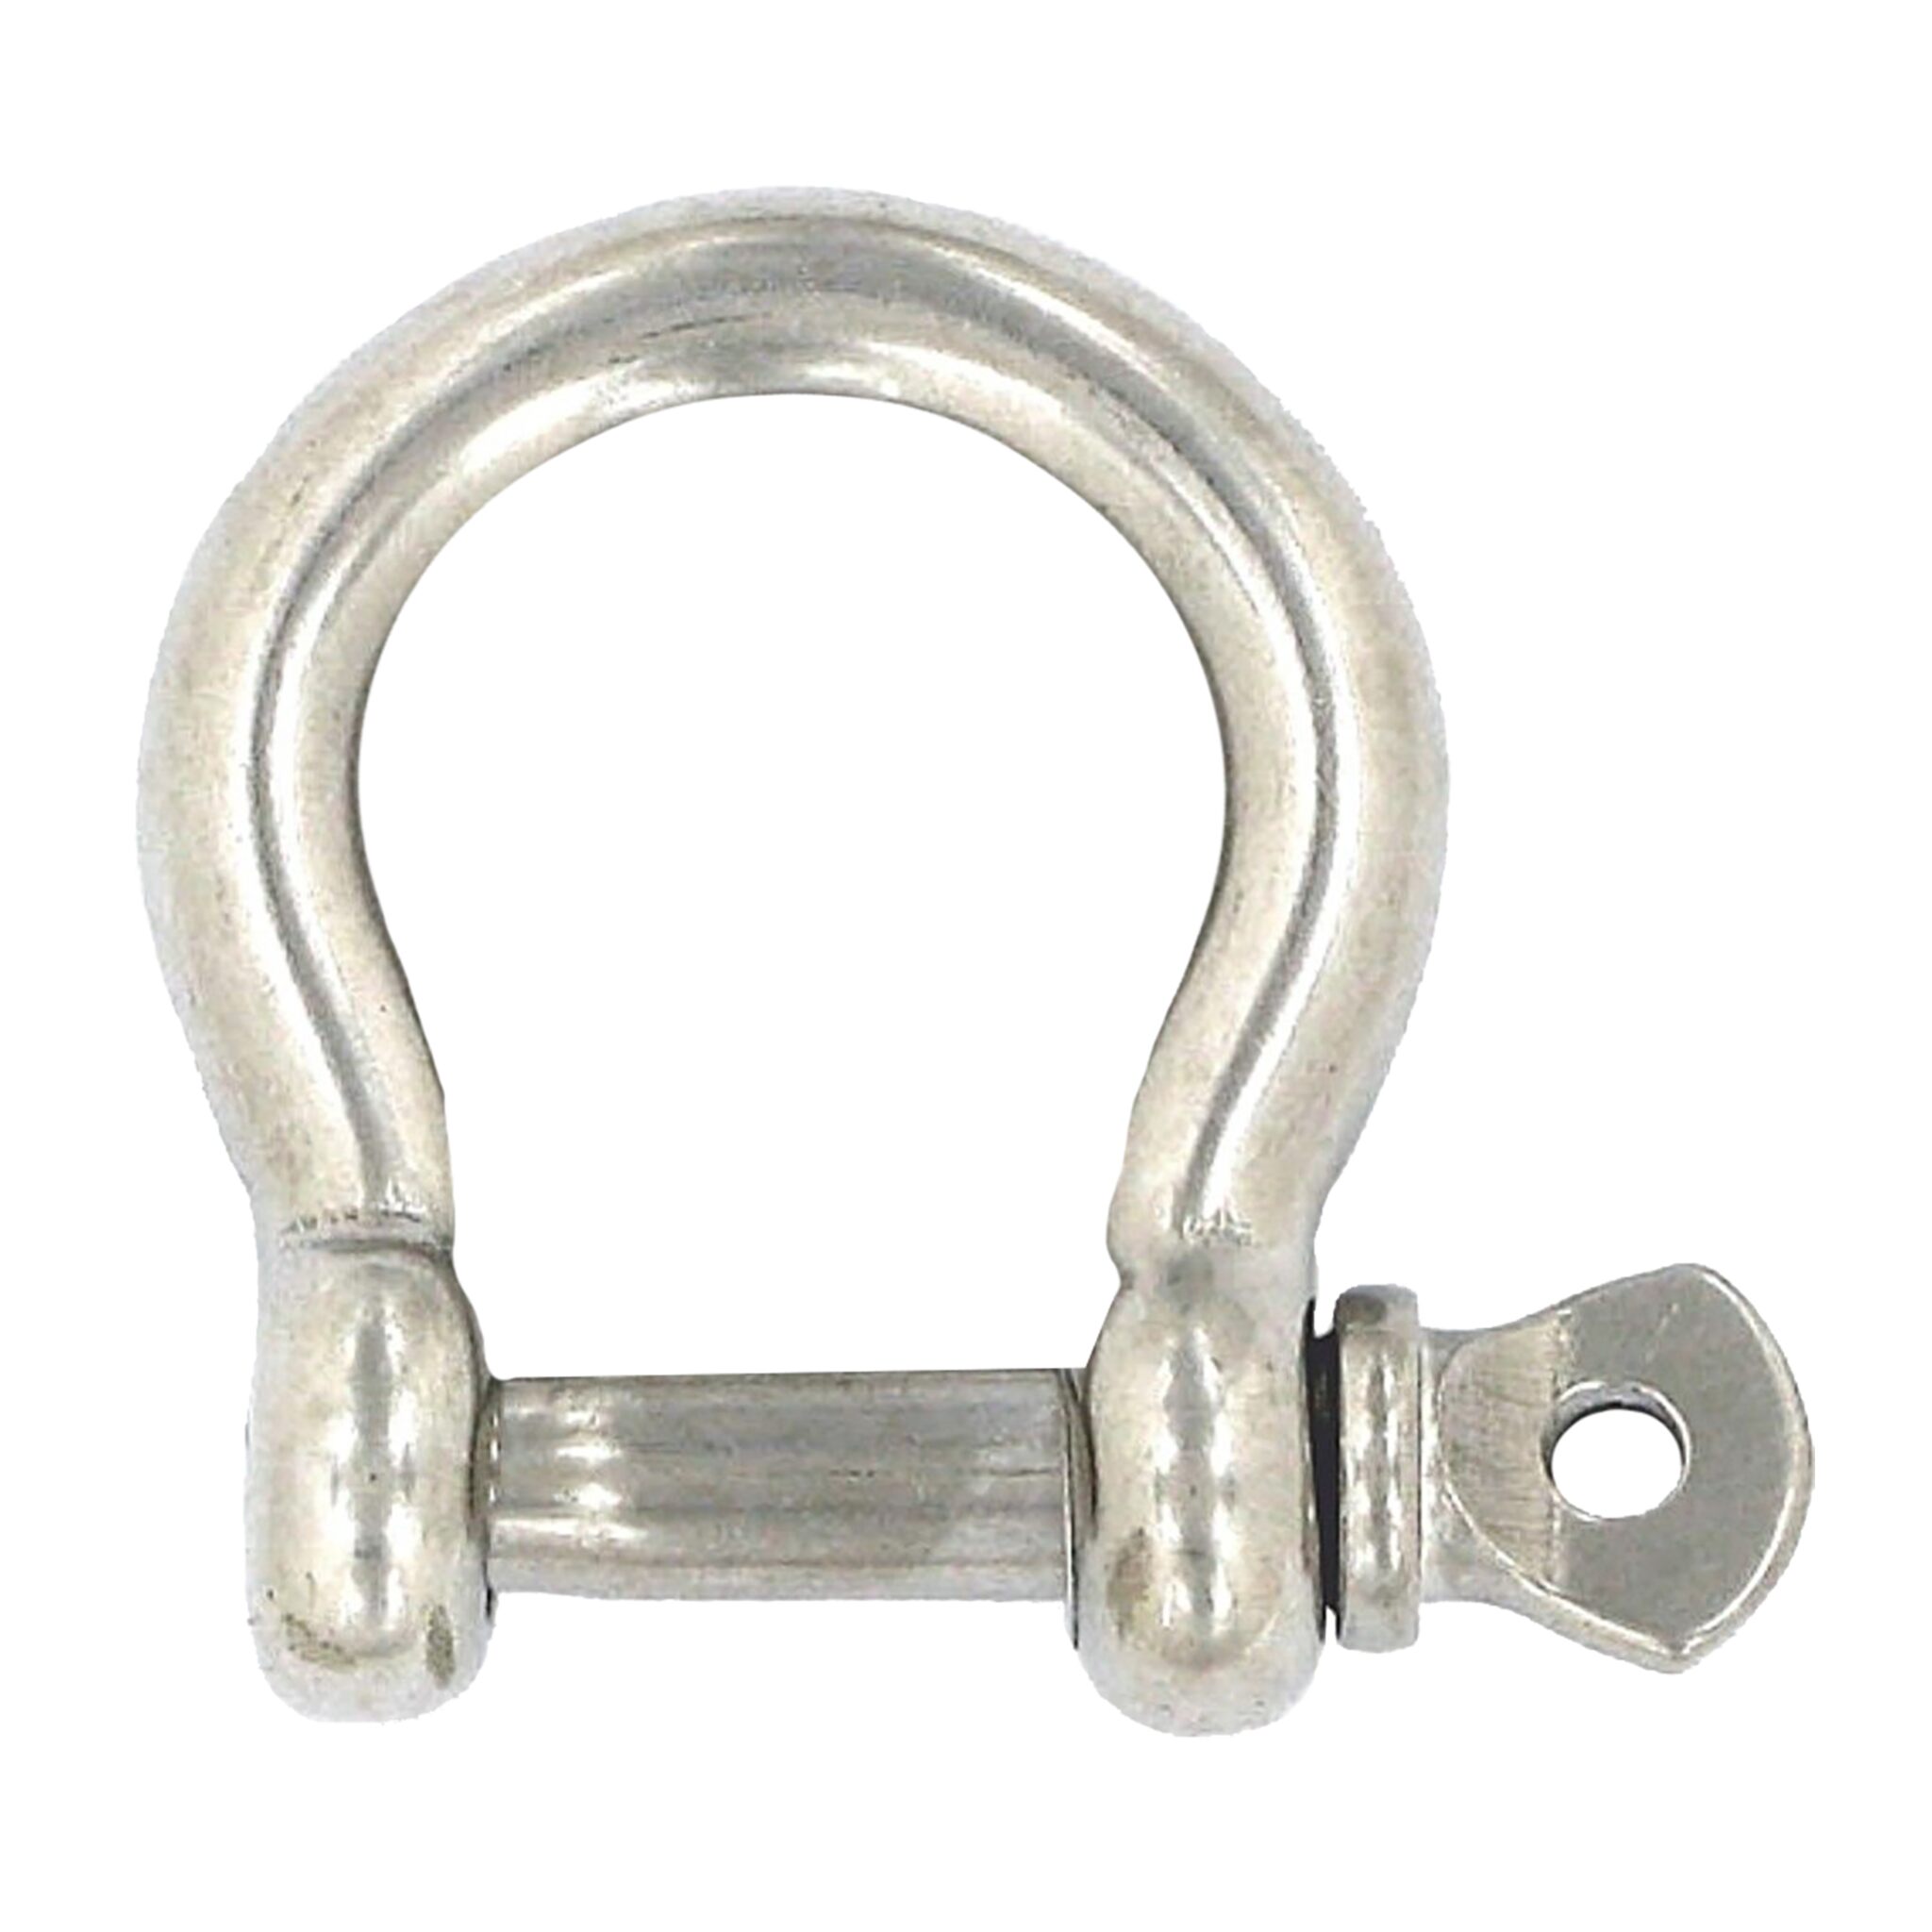 Shackle curved